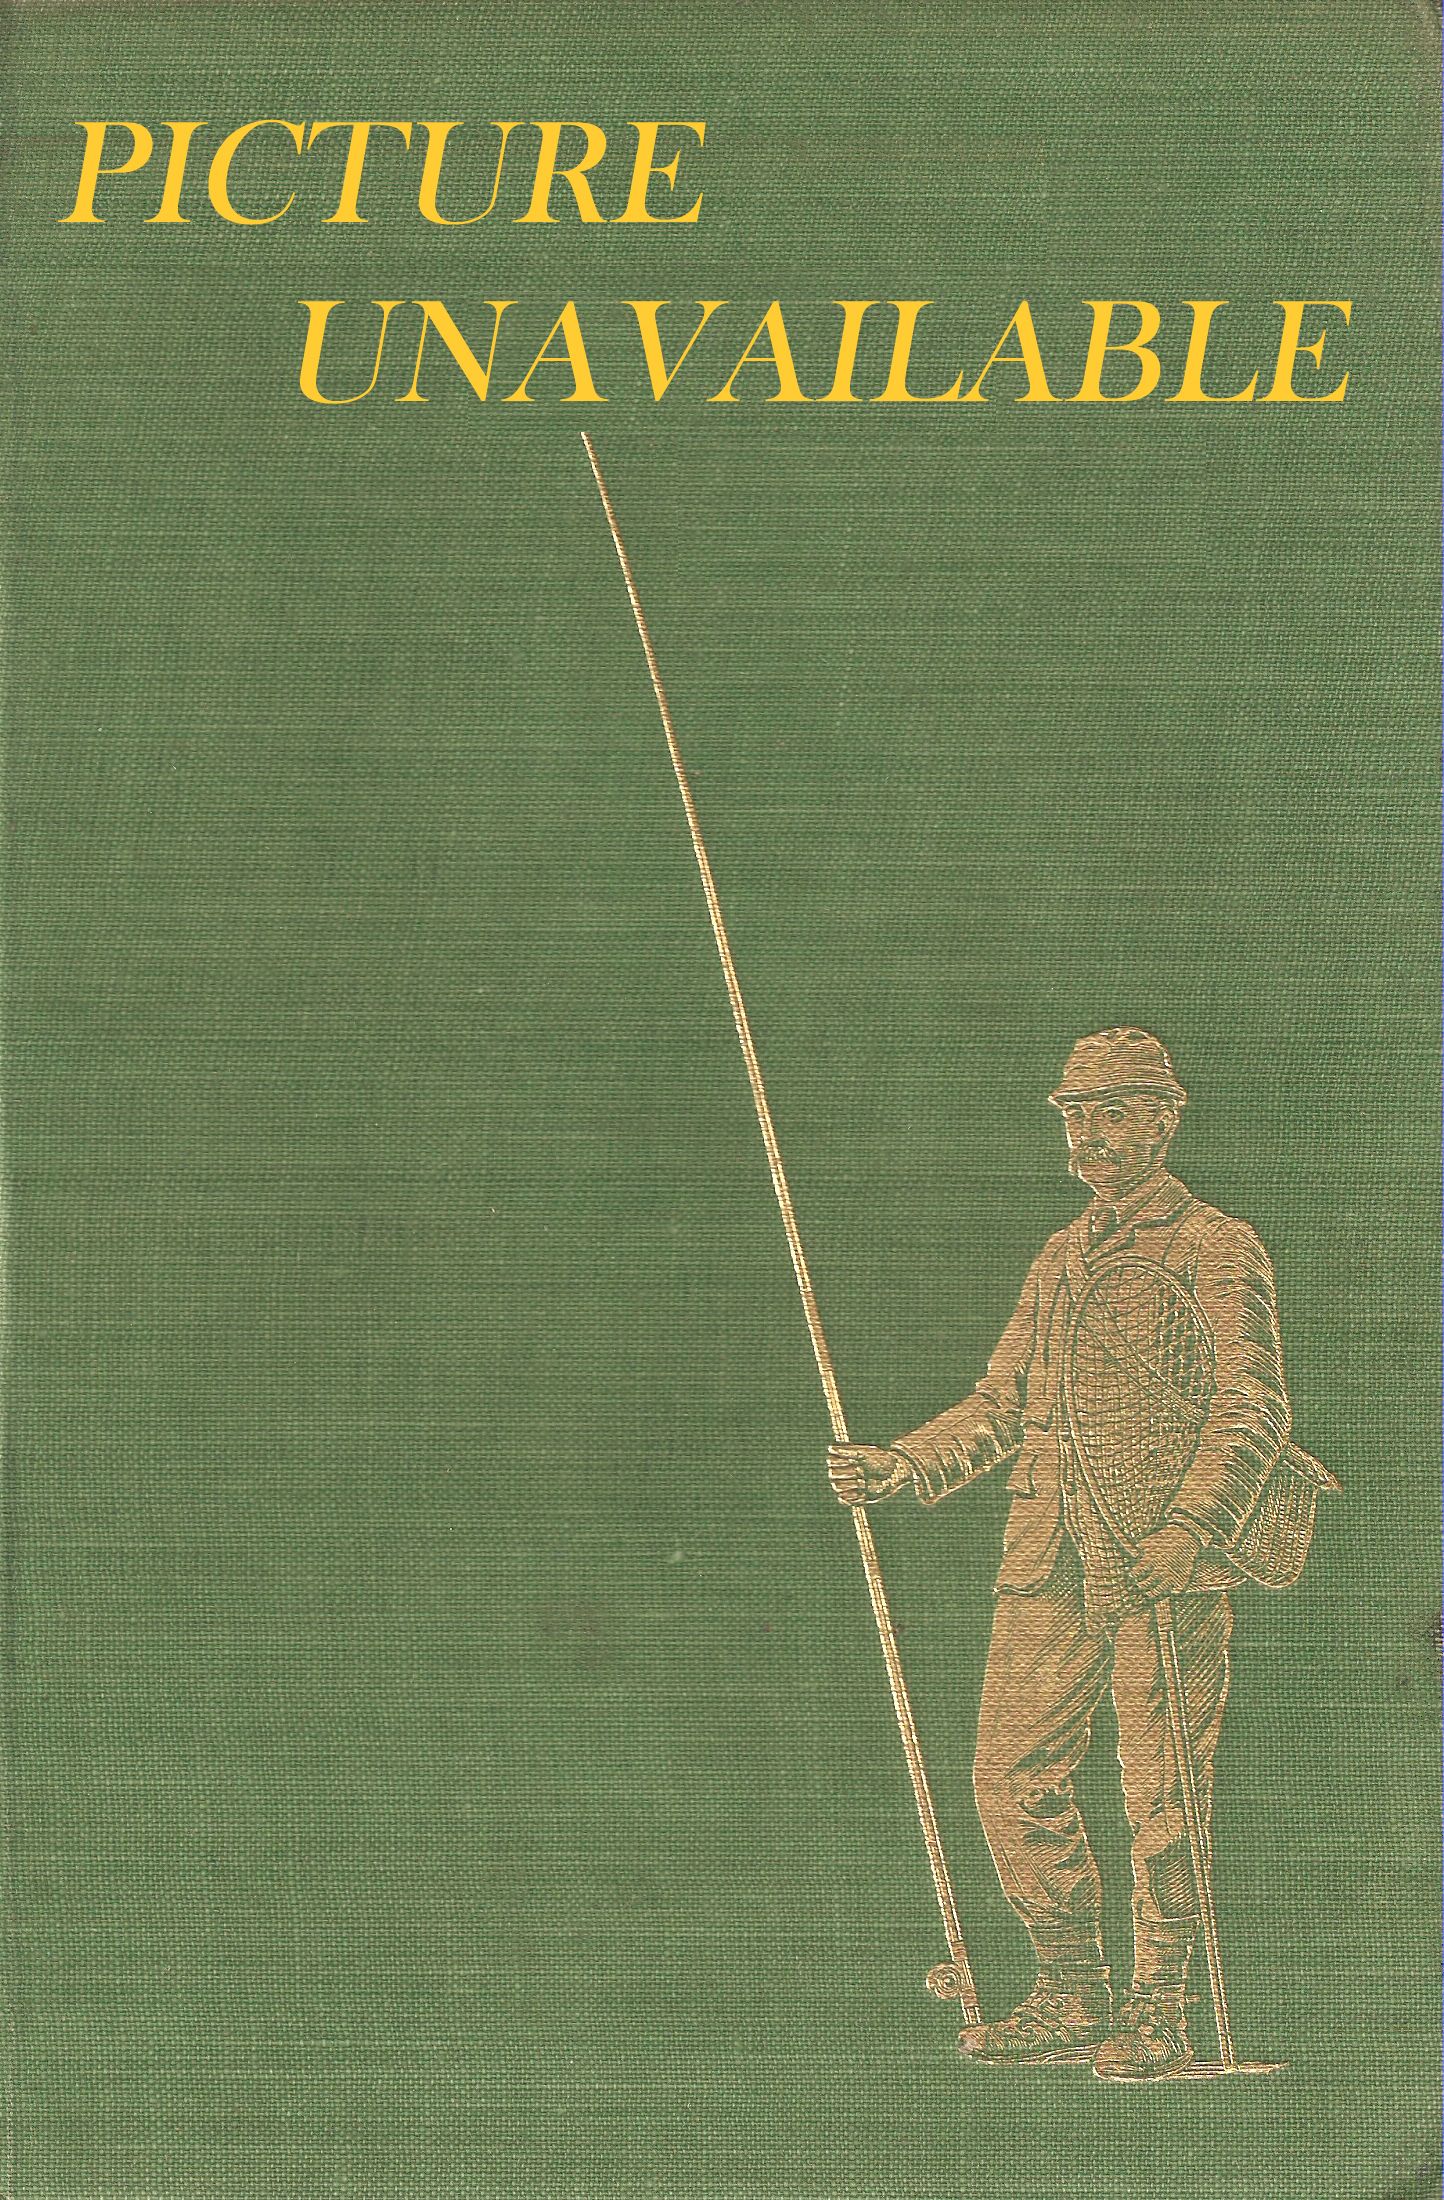 SYNDICATE SHOOTING. By F.G. Standfield.